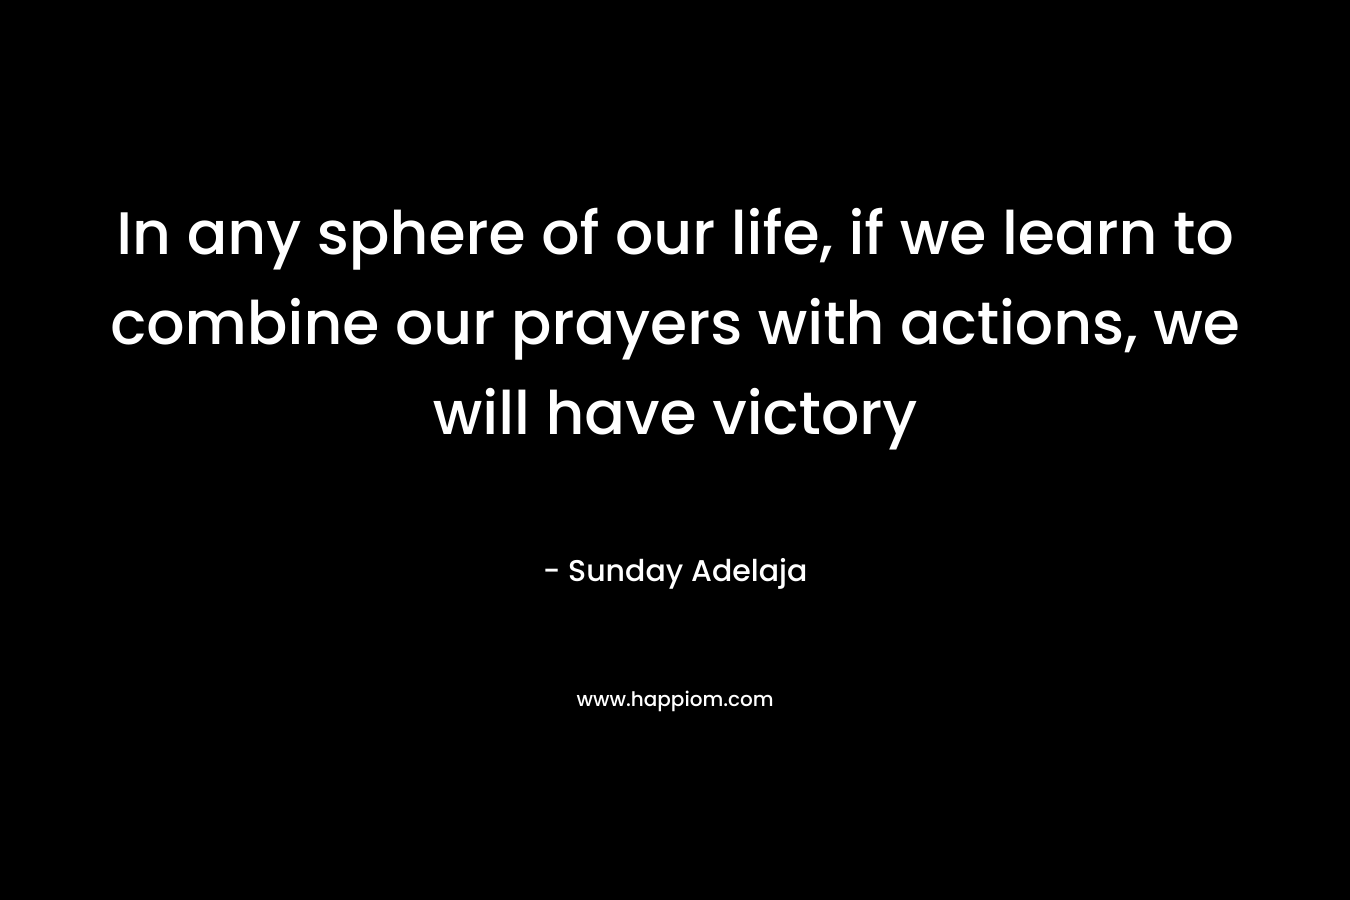 In any sphere of our life, if we learn to combine our prayers with actions, we will have victory